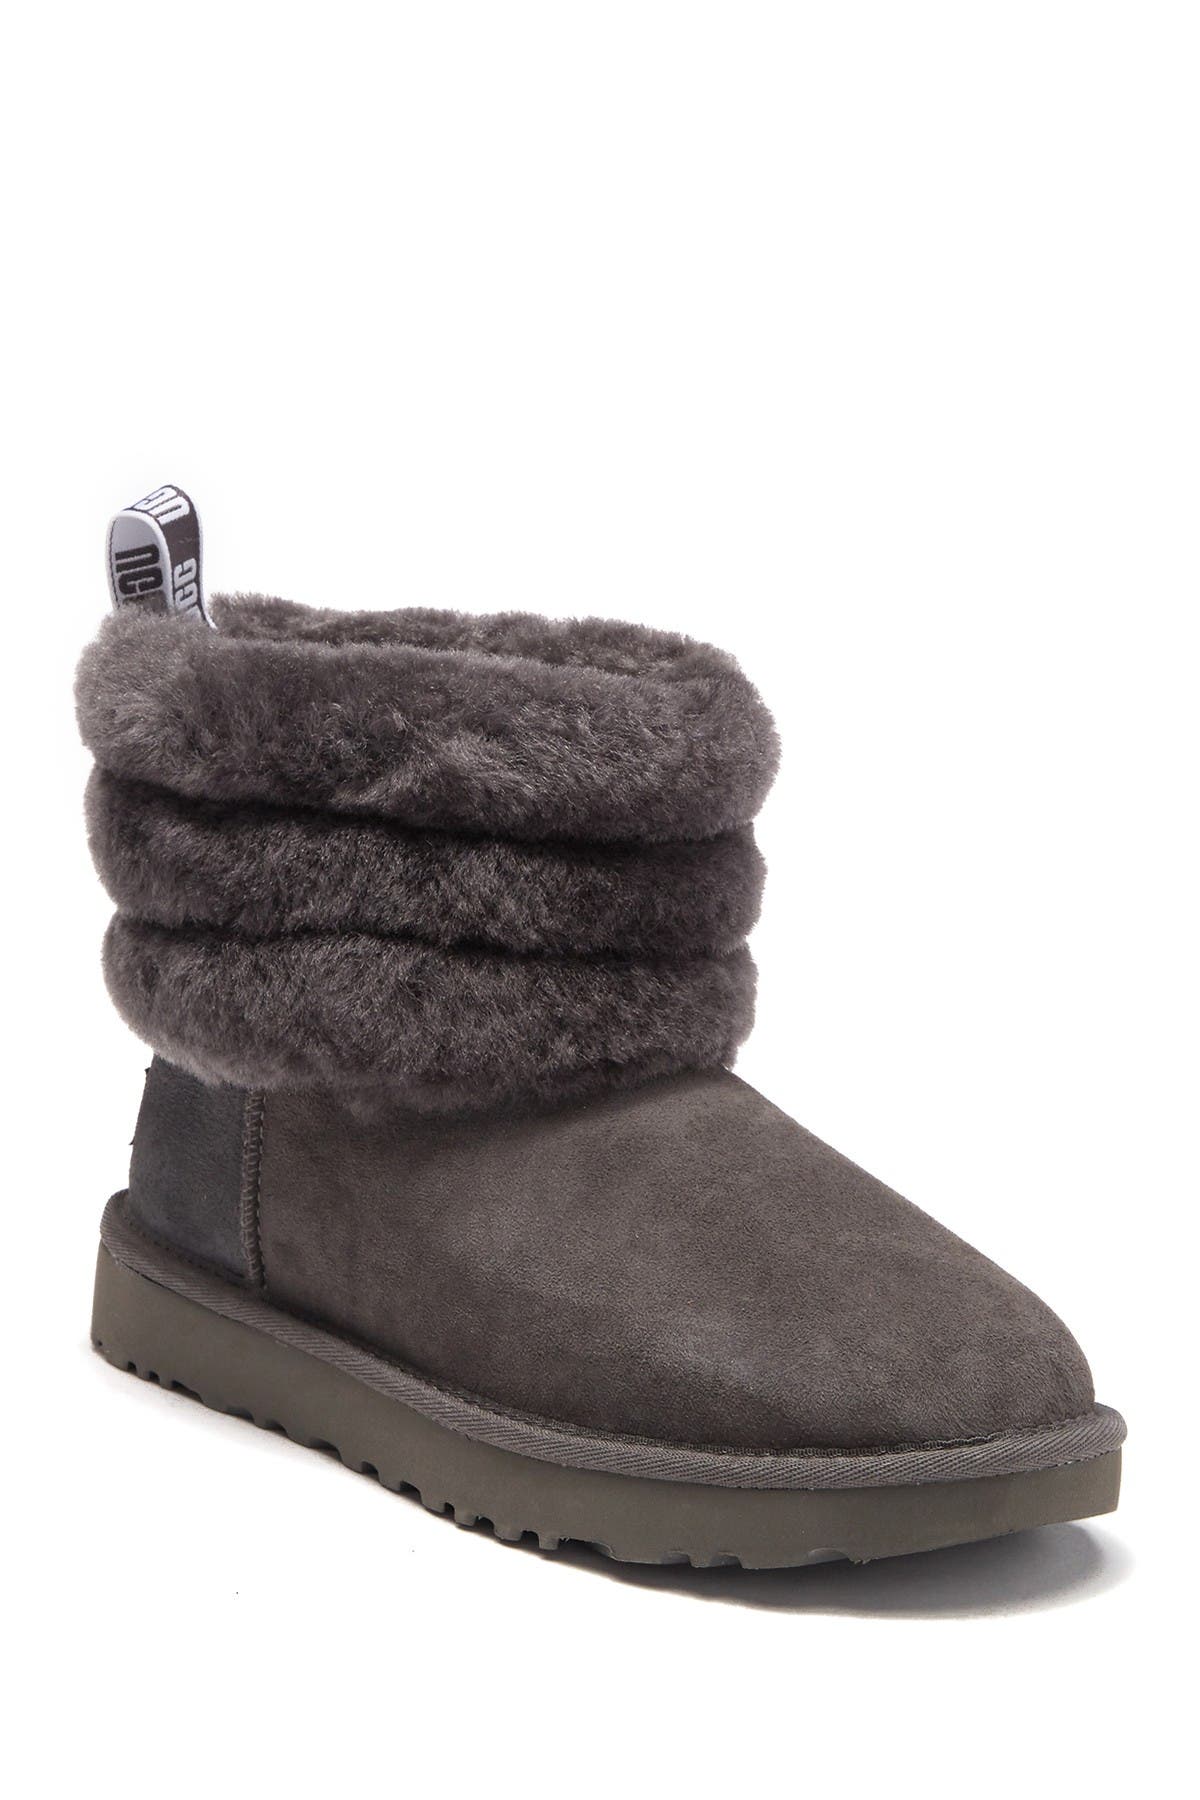 ugg women's classic mini fluff quilted